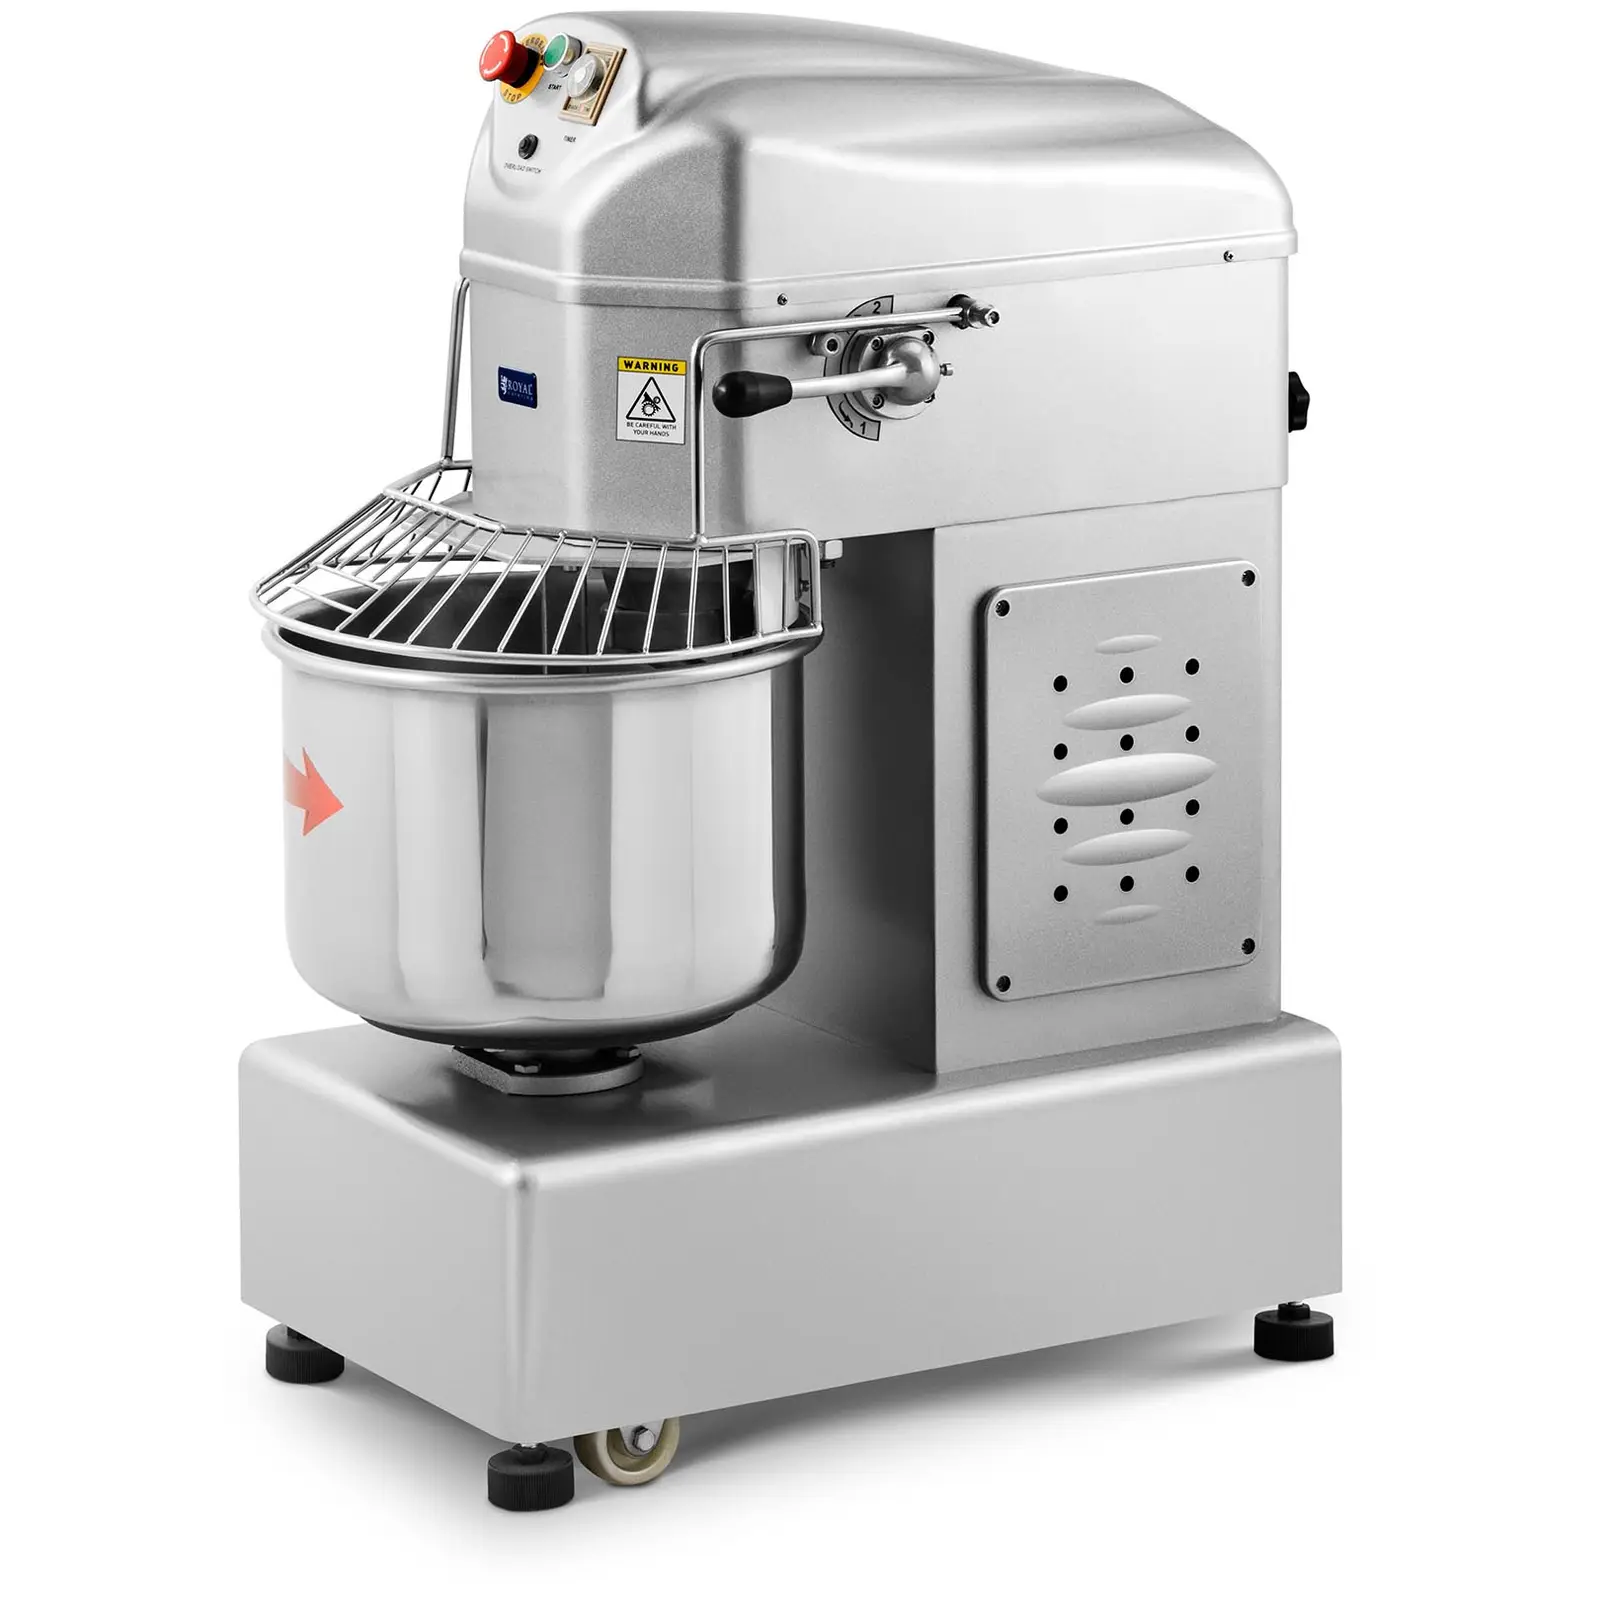 Kneading Machine - 30 L - Royal Catering - 2100 W